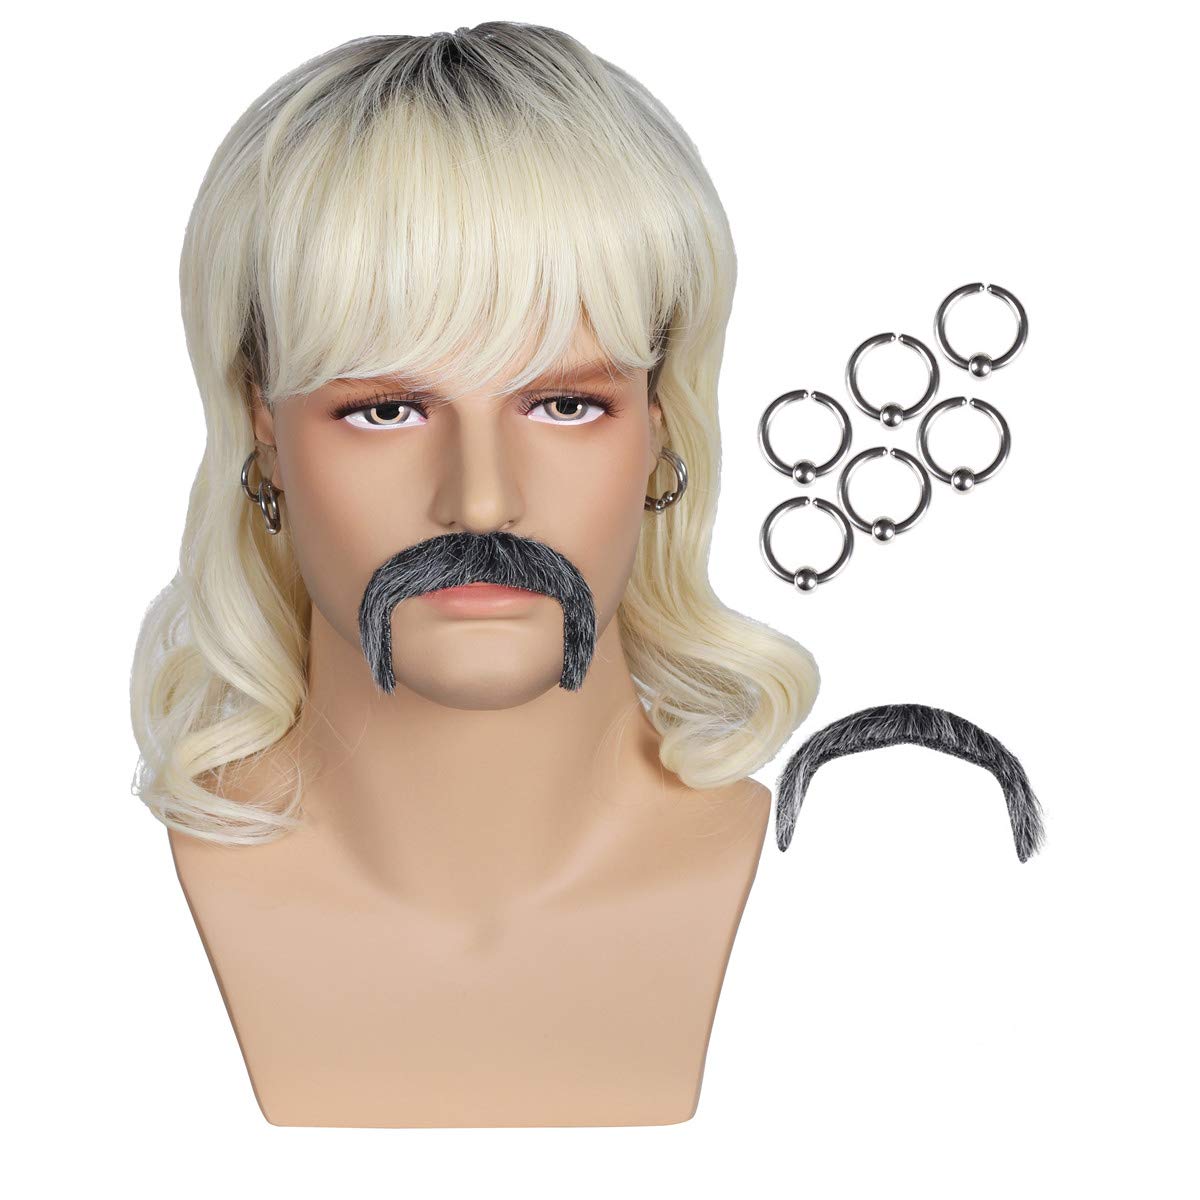 Dark Root Wig with 6 Earrings and Mustache for Men